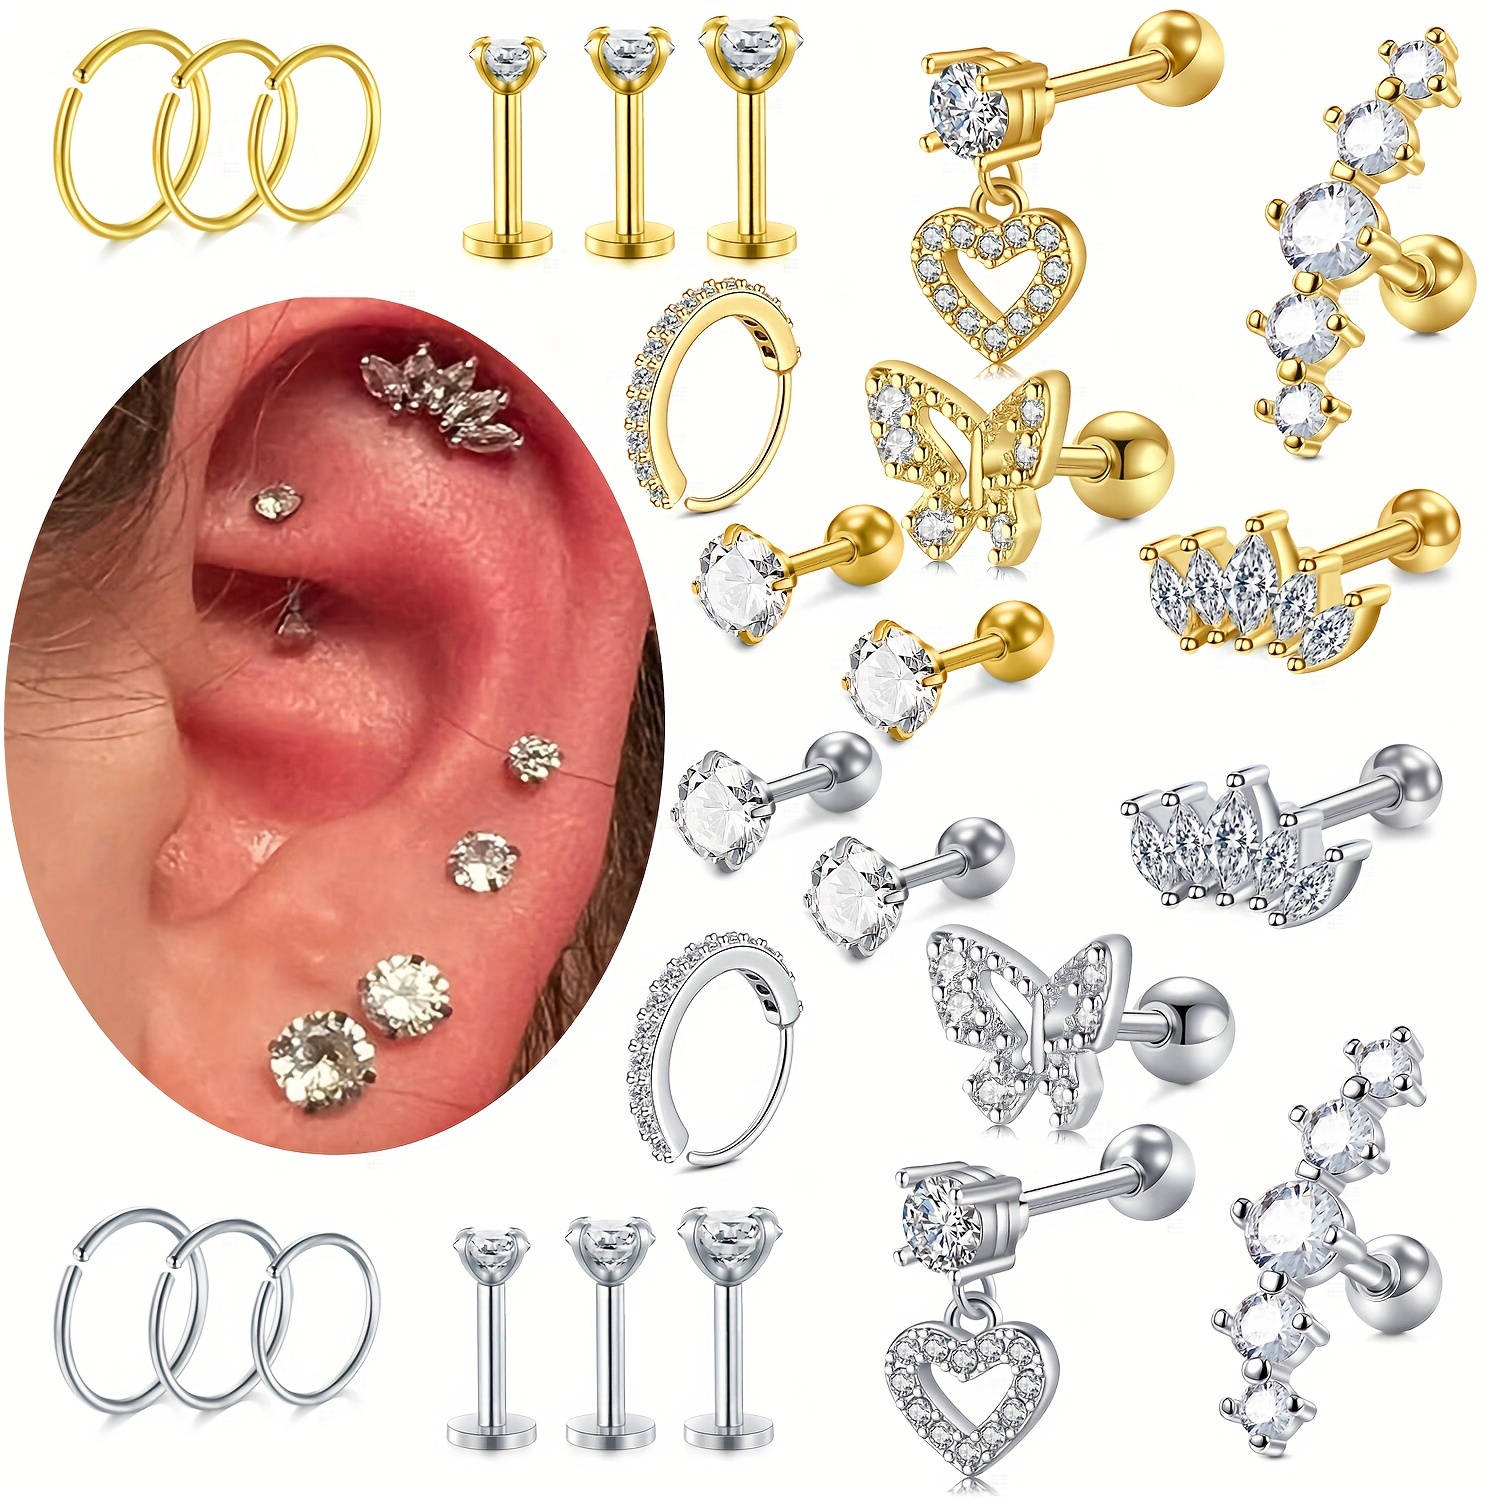 

13pcs 316l Stainless Steel Cartilage Earrings Set Inlaid Shiny Zircon Exquisite Elegant Ear Piercing Jewelry Set